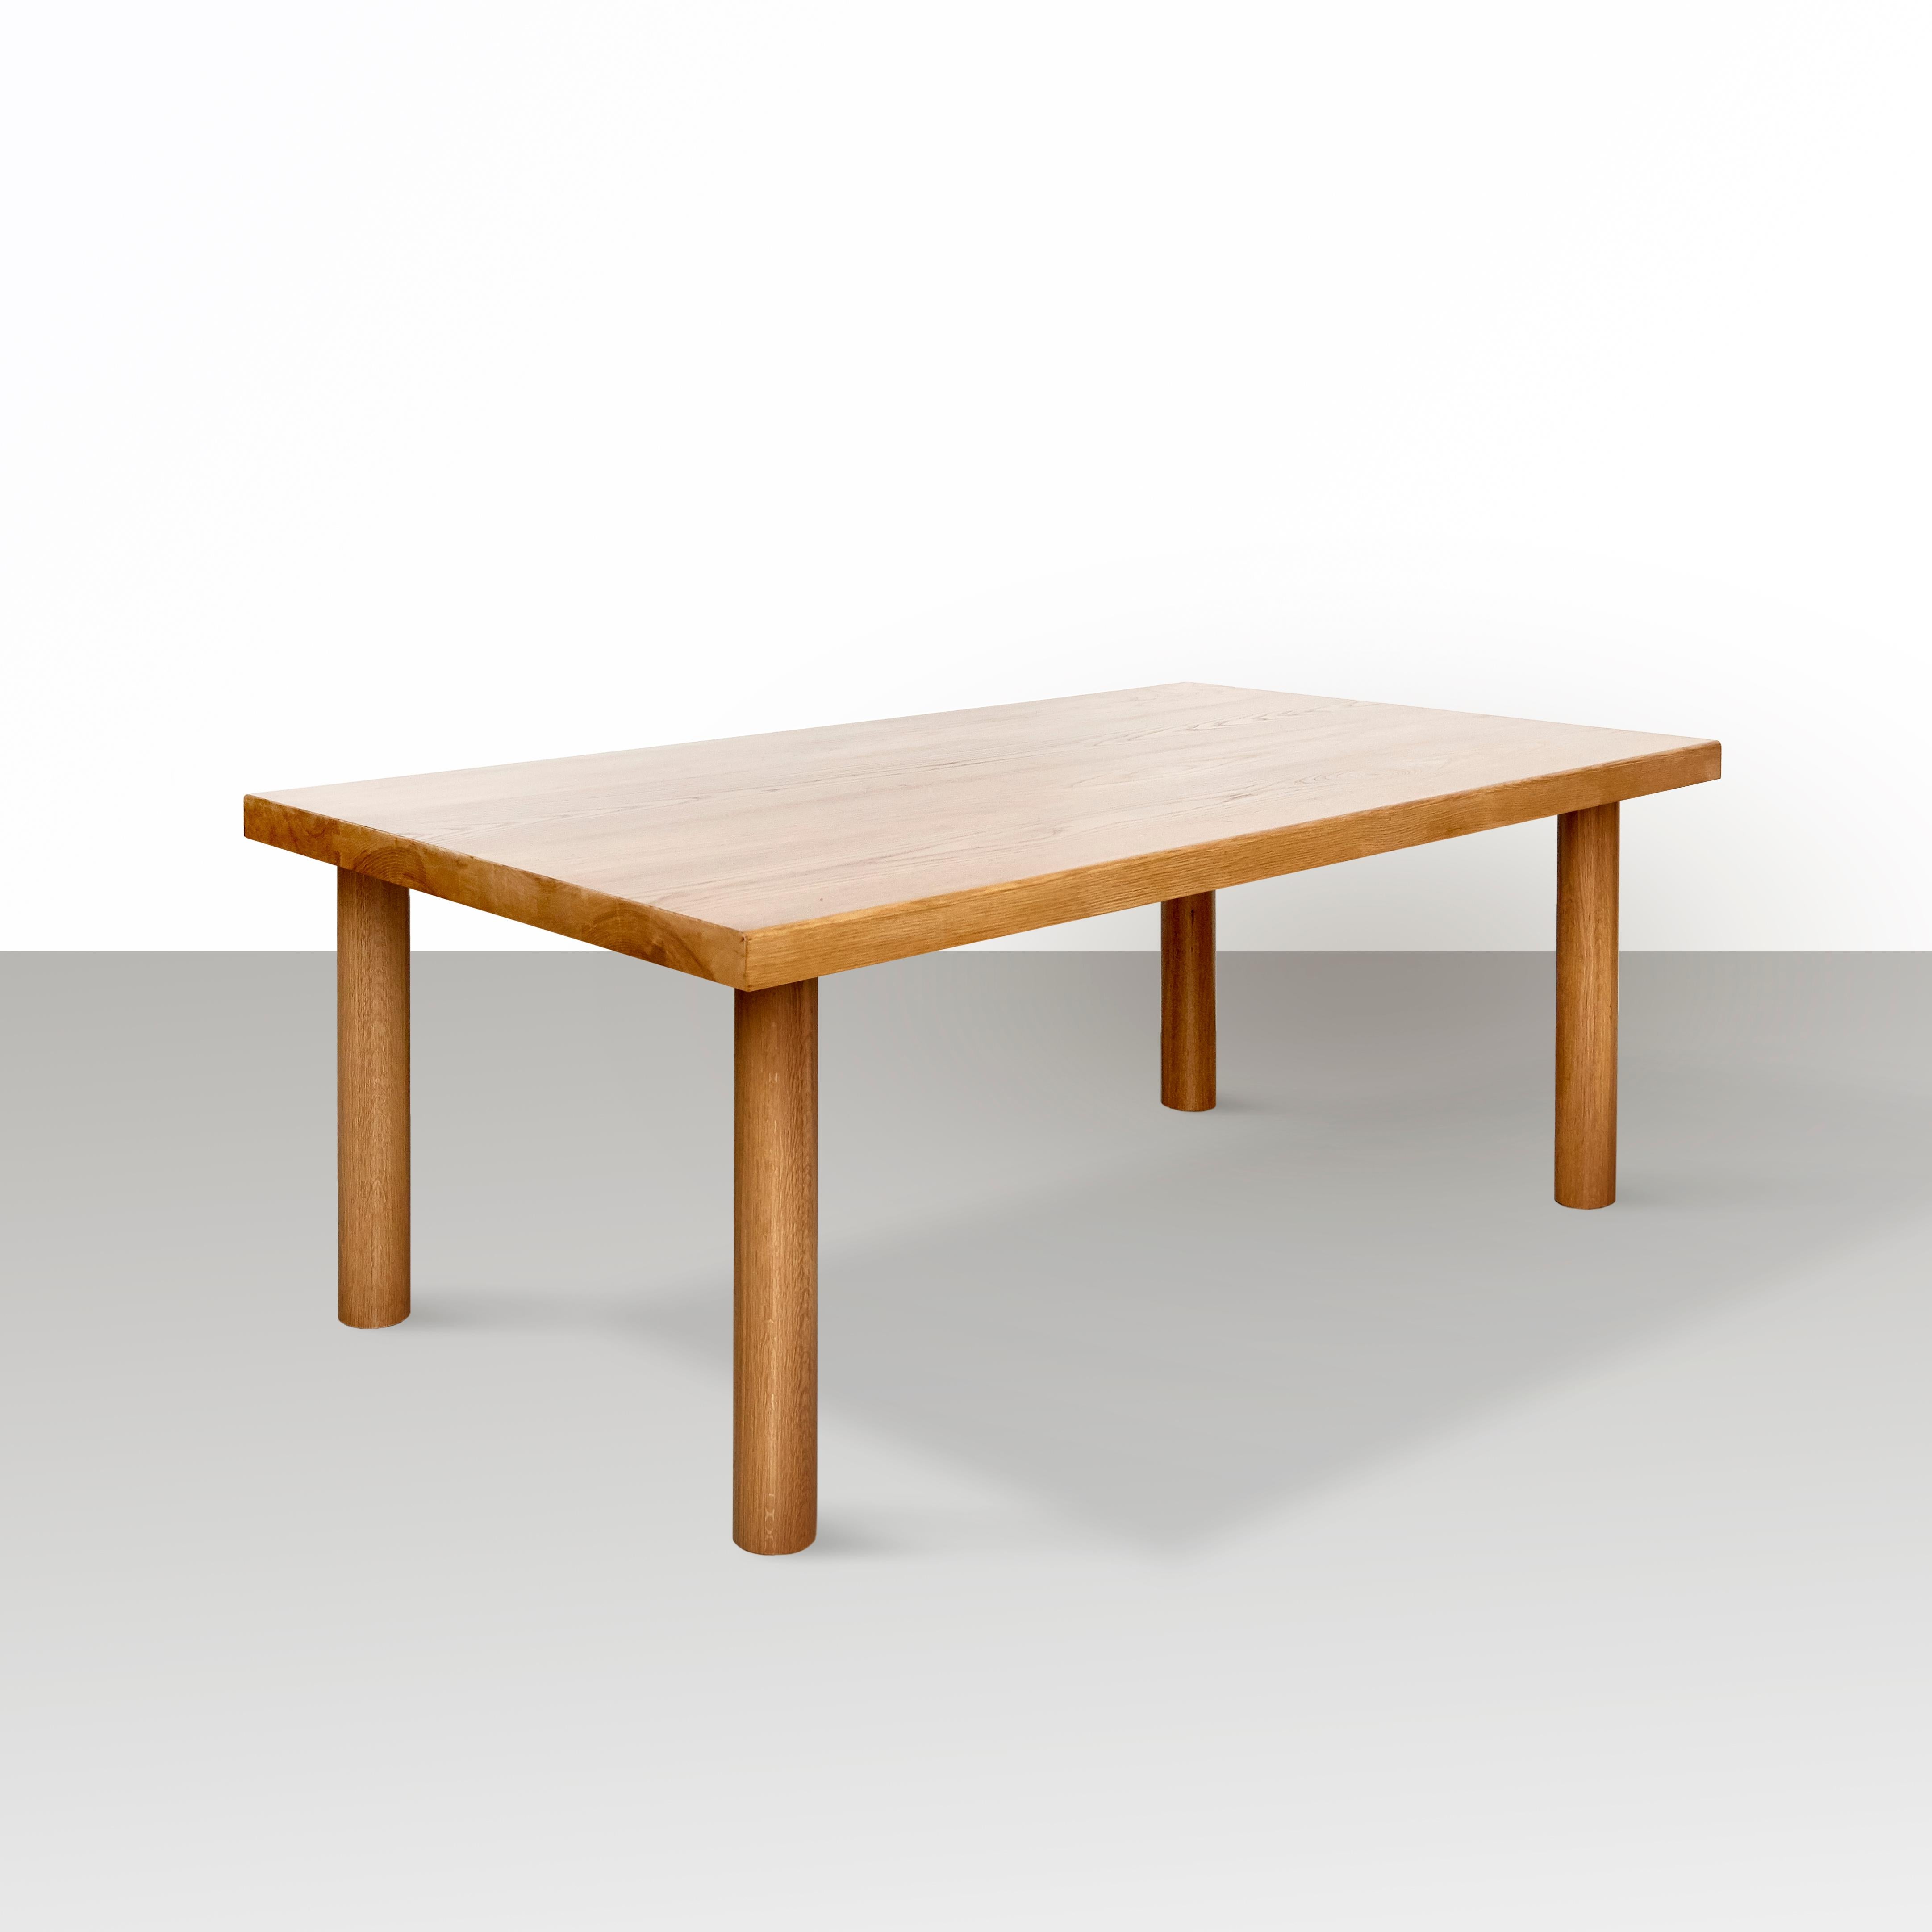 Spanish Dada Est. Contemporary Solid Ash Dining Table